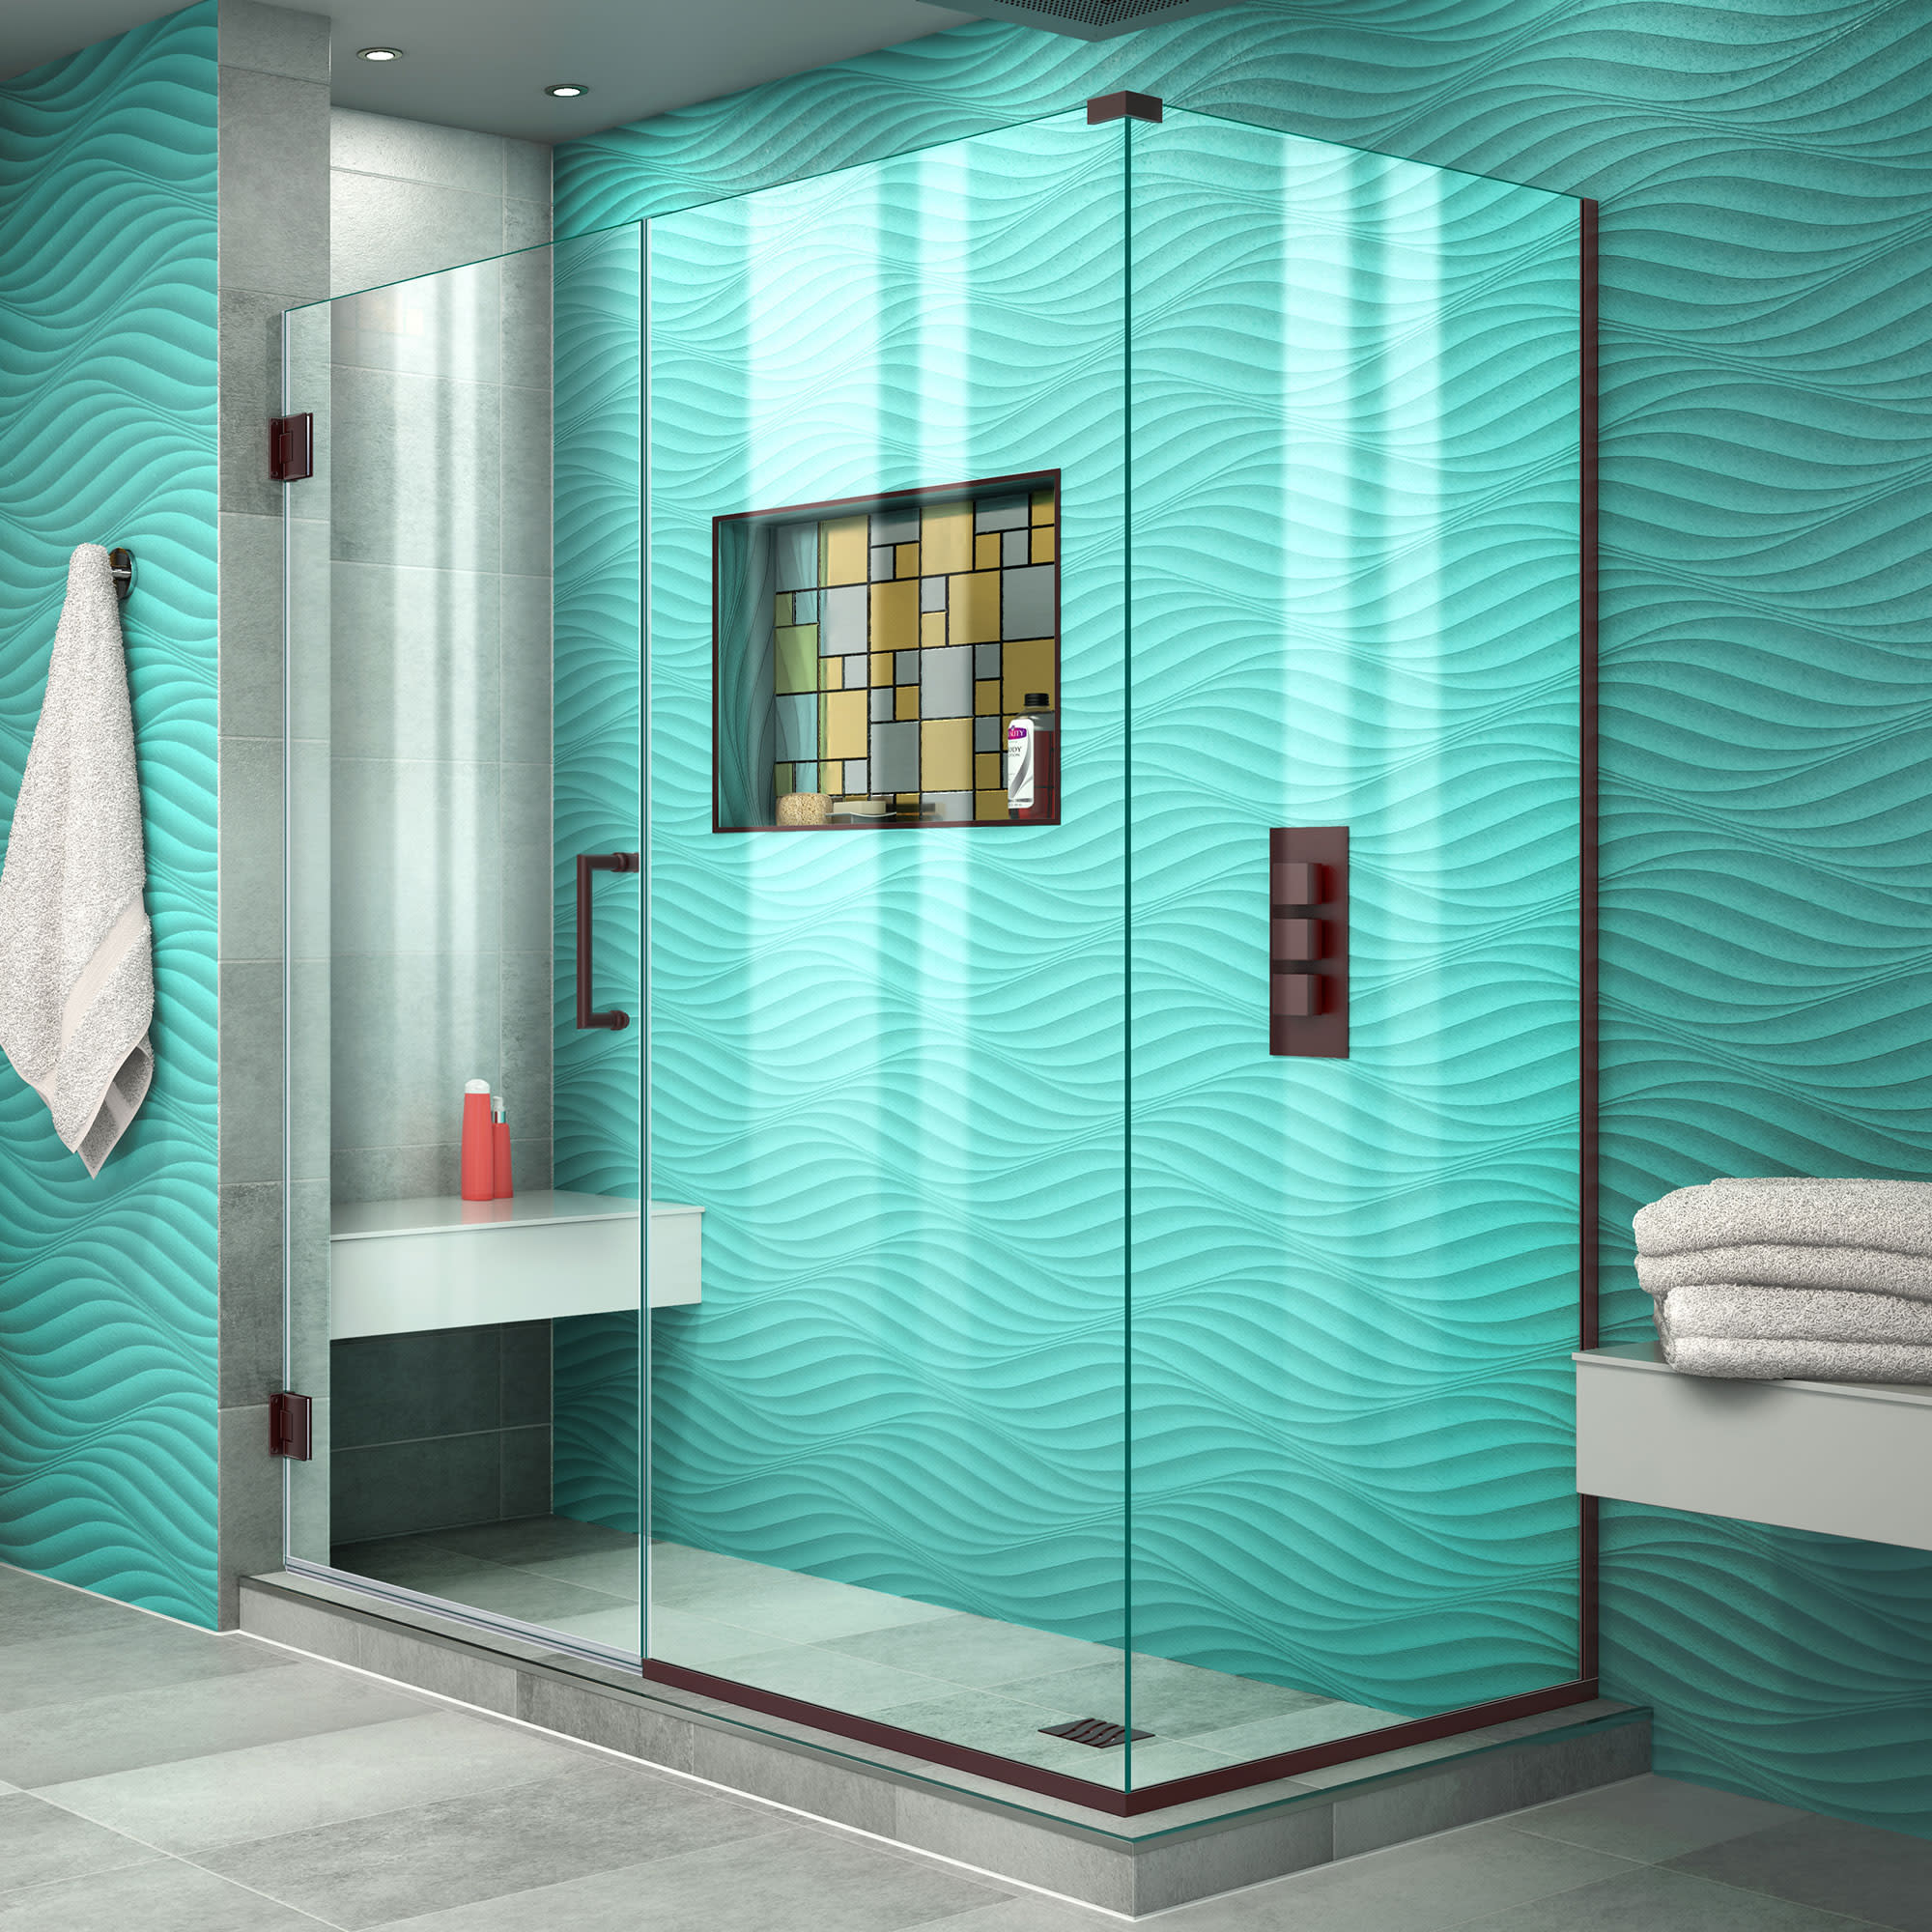 https://visualhunt.com/photos/title/8-expert-tips-to-choose-a-shower-stall-enclosure.jpg